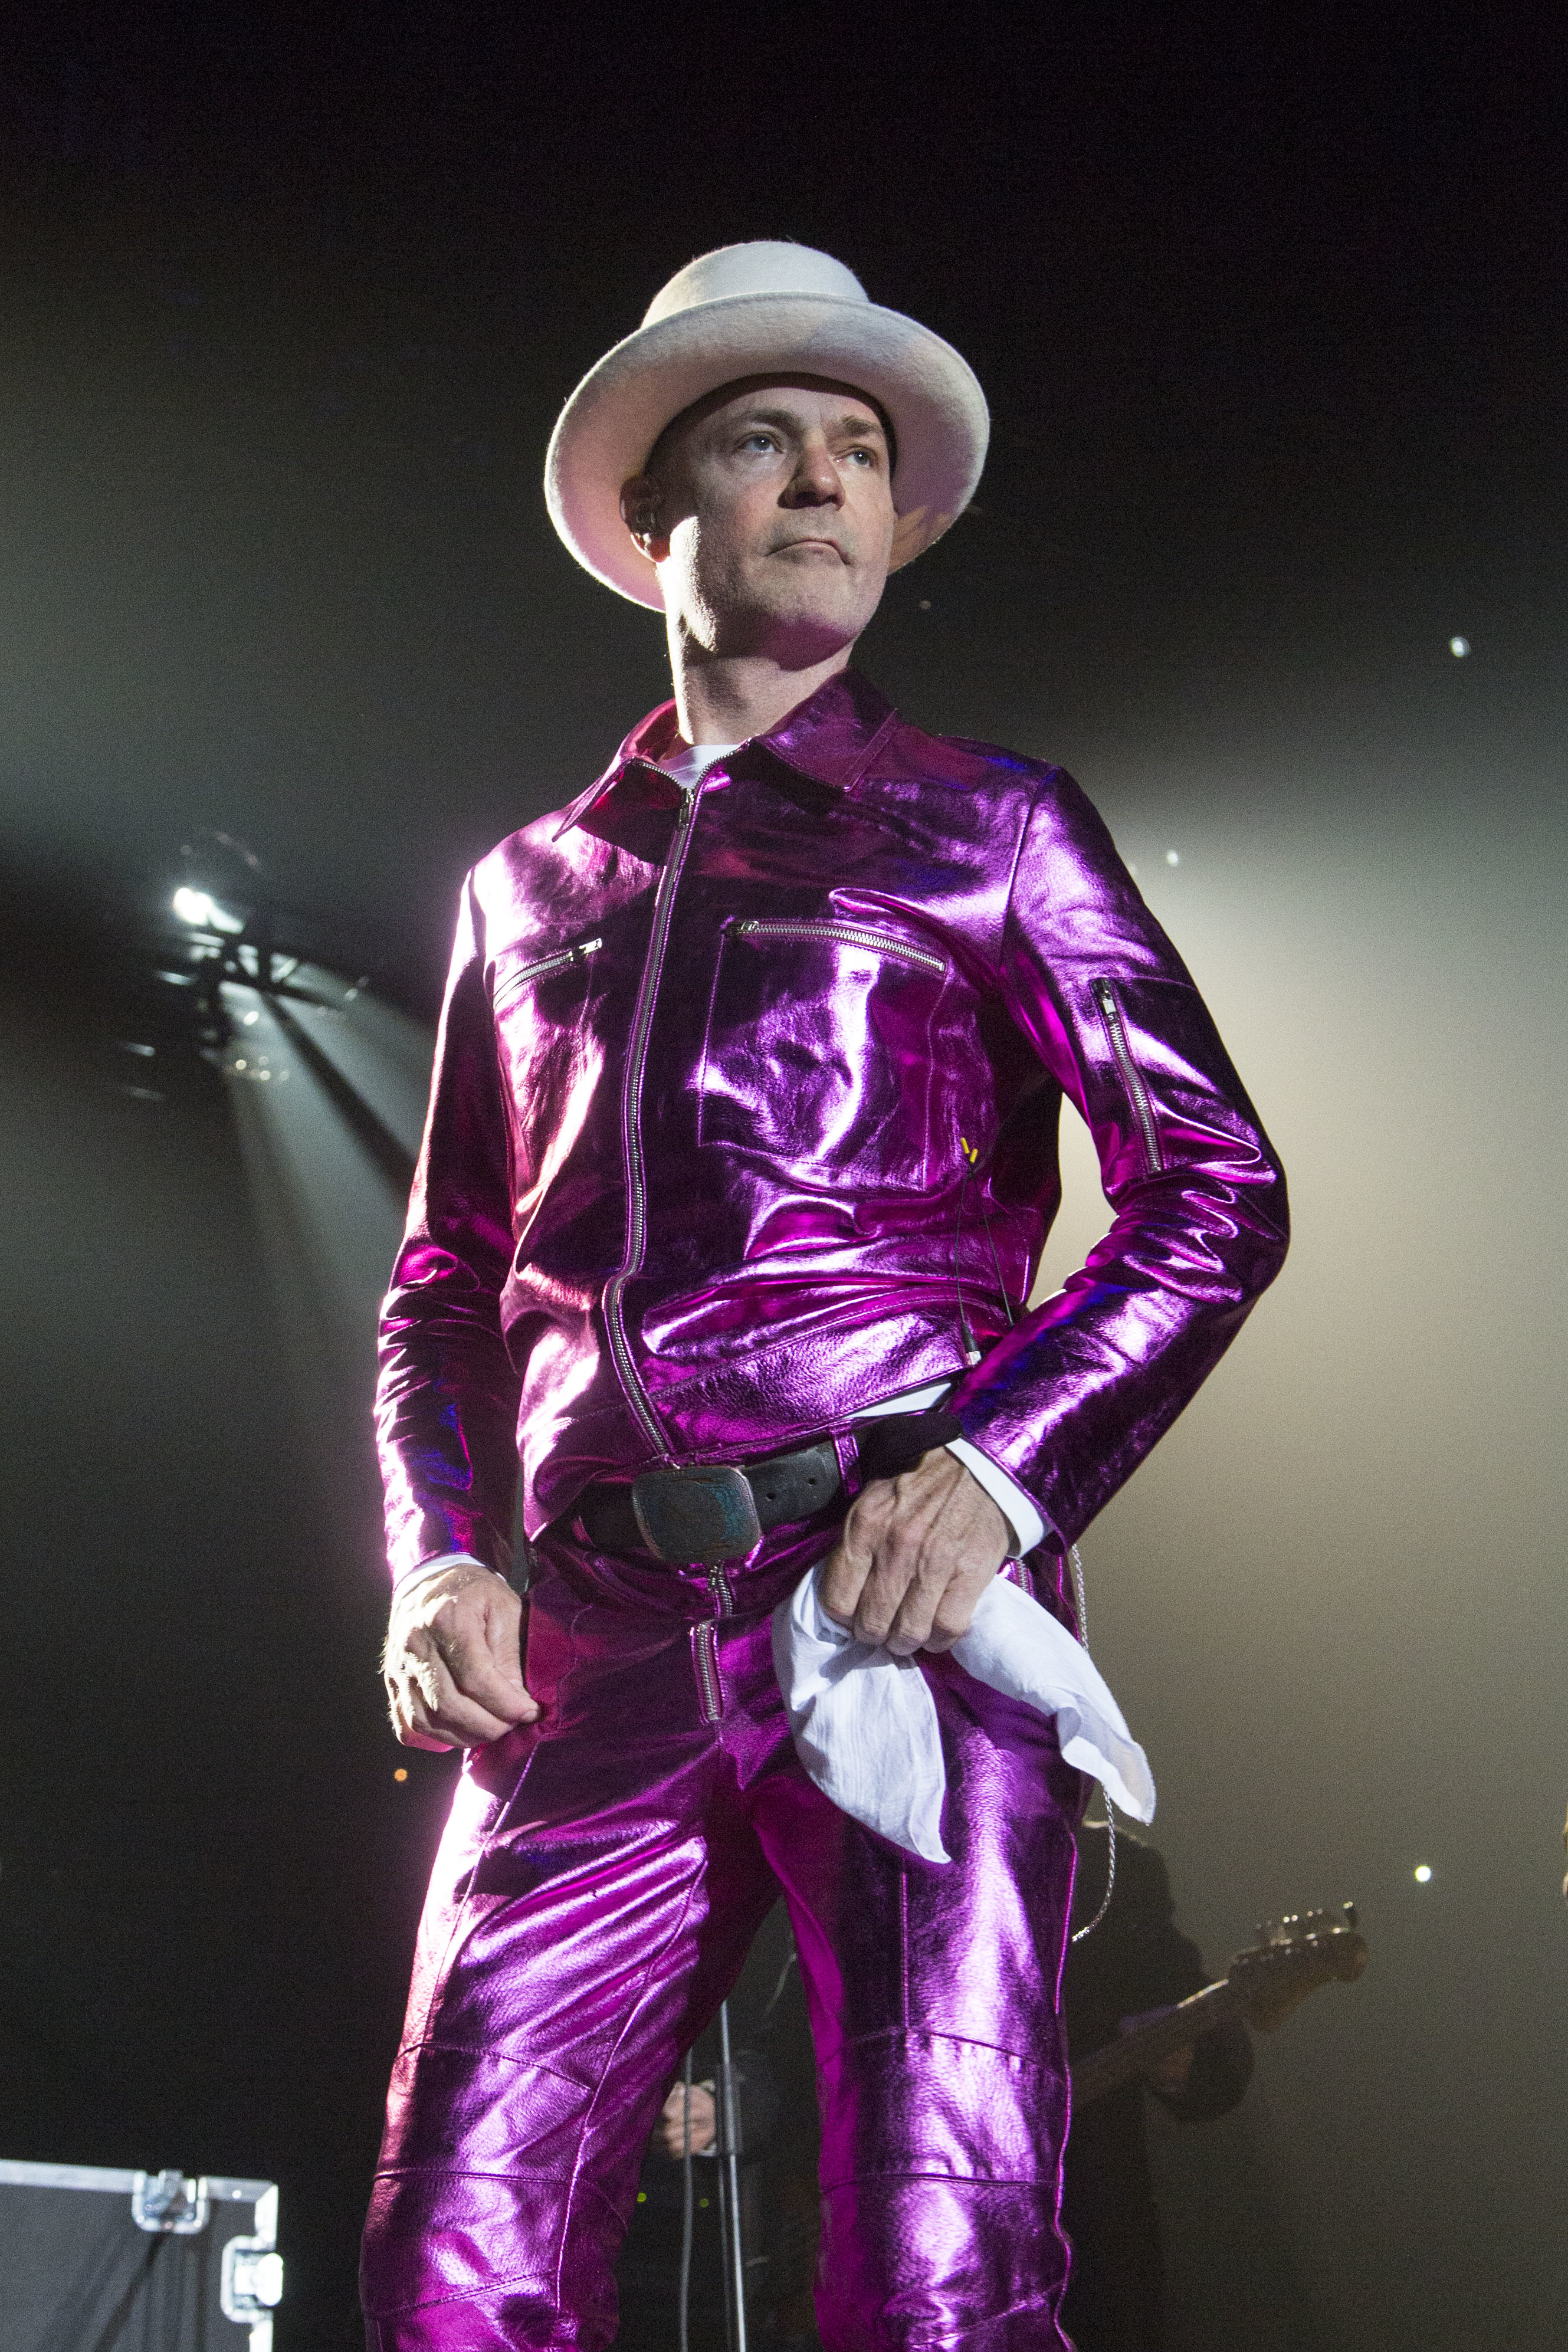 Man in a shiny purple suit and white hat holding a white cloth, standing on stage with a spotlight behind him